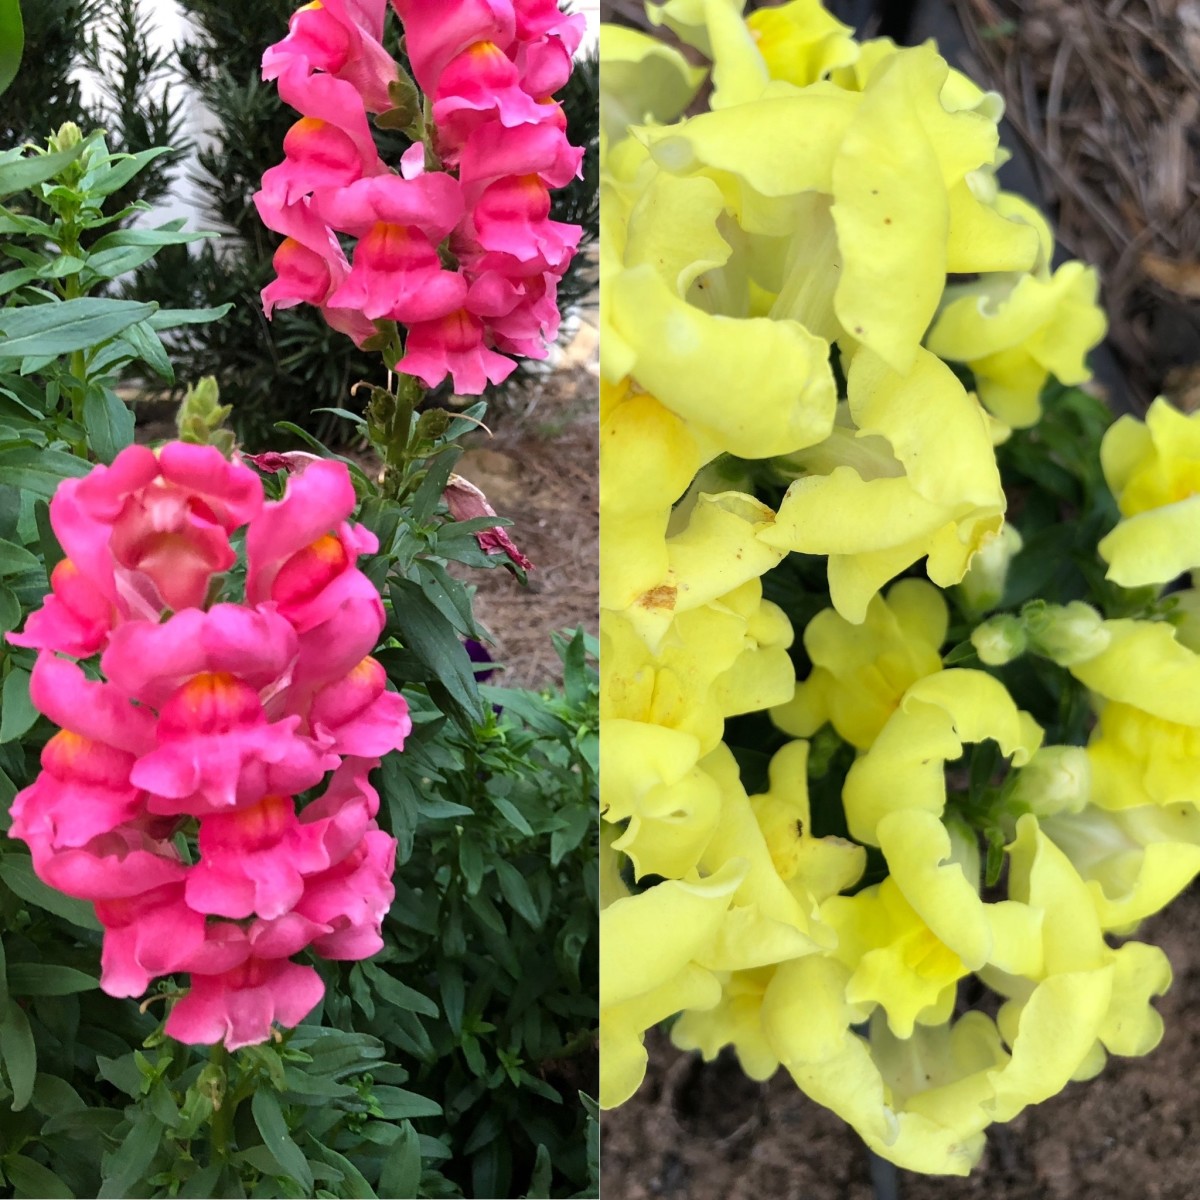 Of all the colorful winter flowers, snapdragons are my absolute favorite.